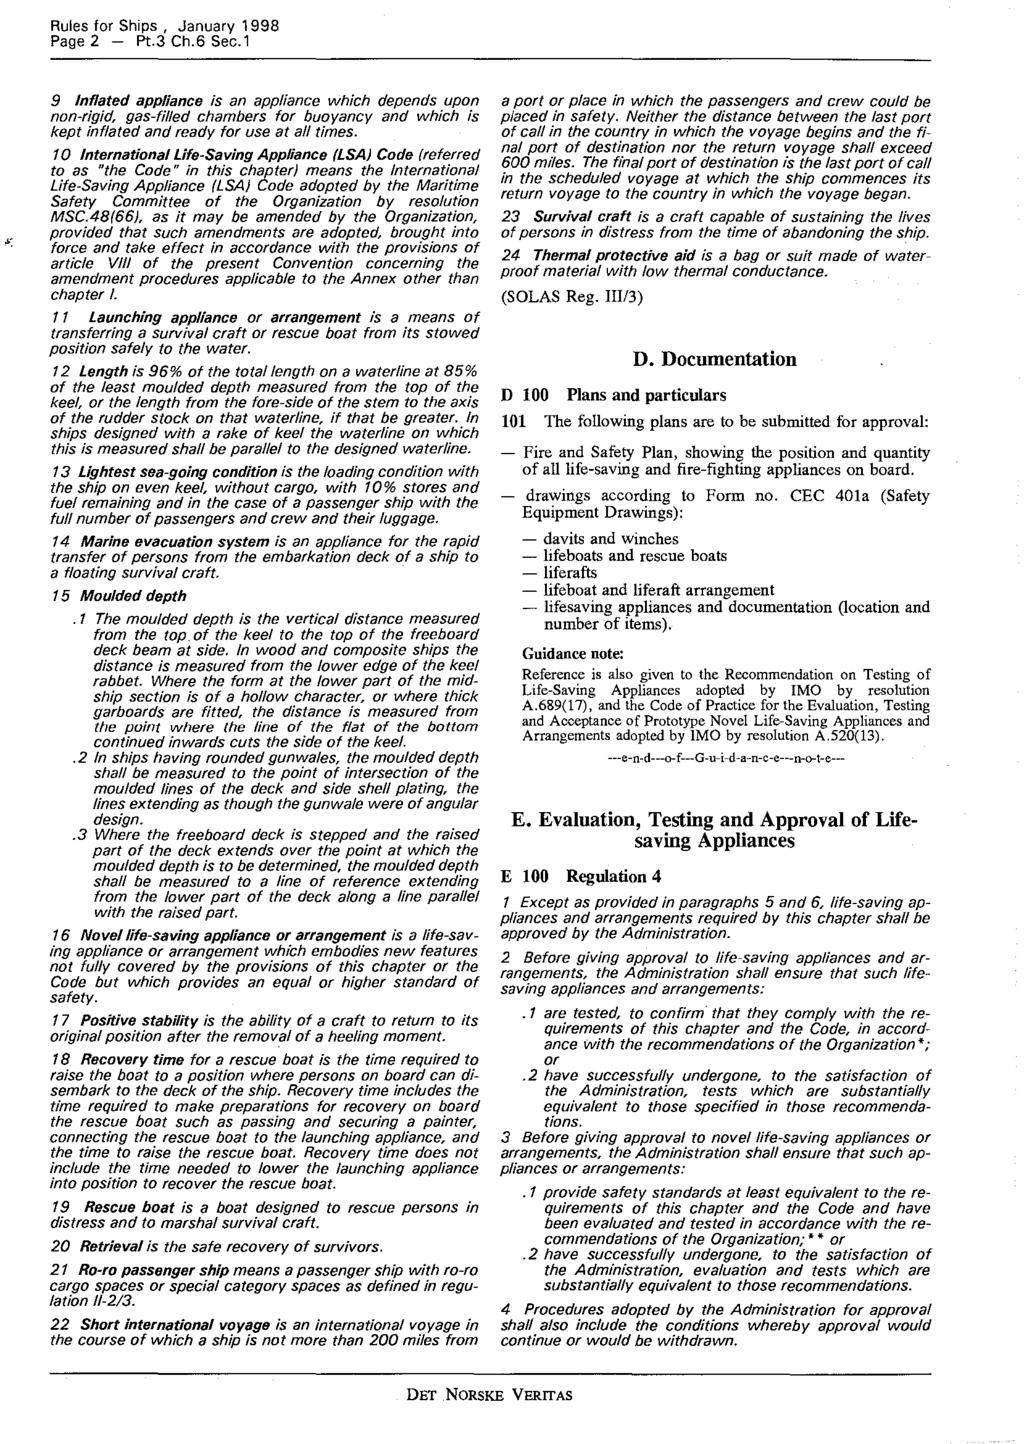 Rules tor Ships, January 1998 Page 2 - Pt.3 Ch.6 Sec.